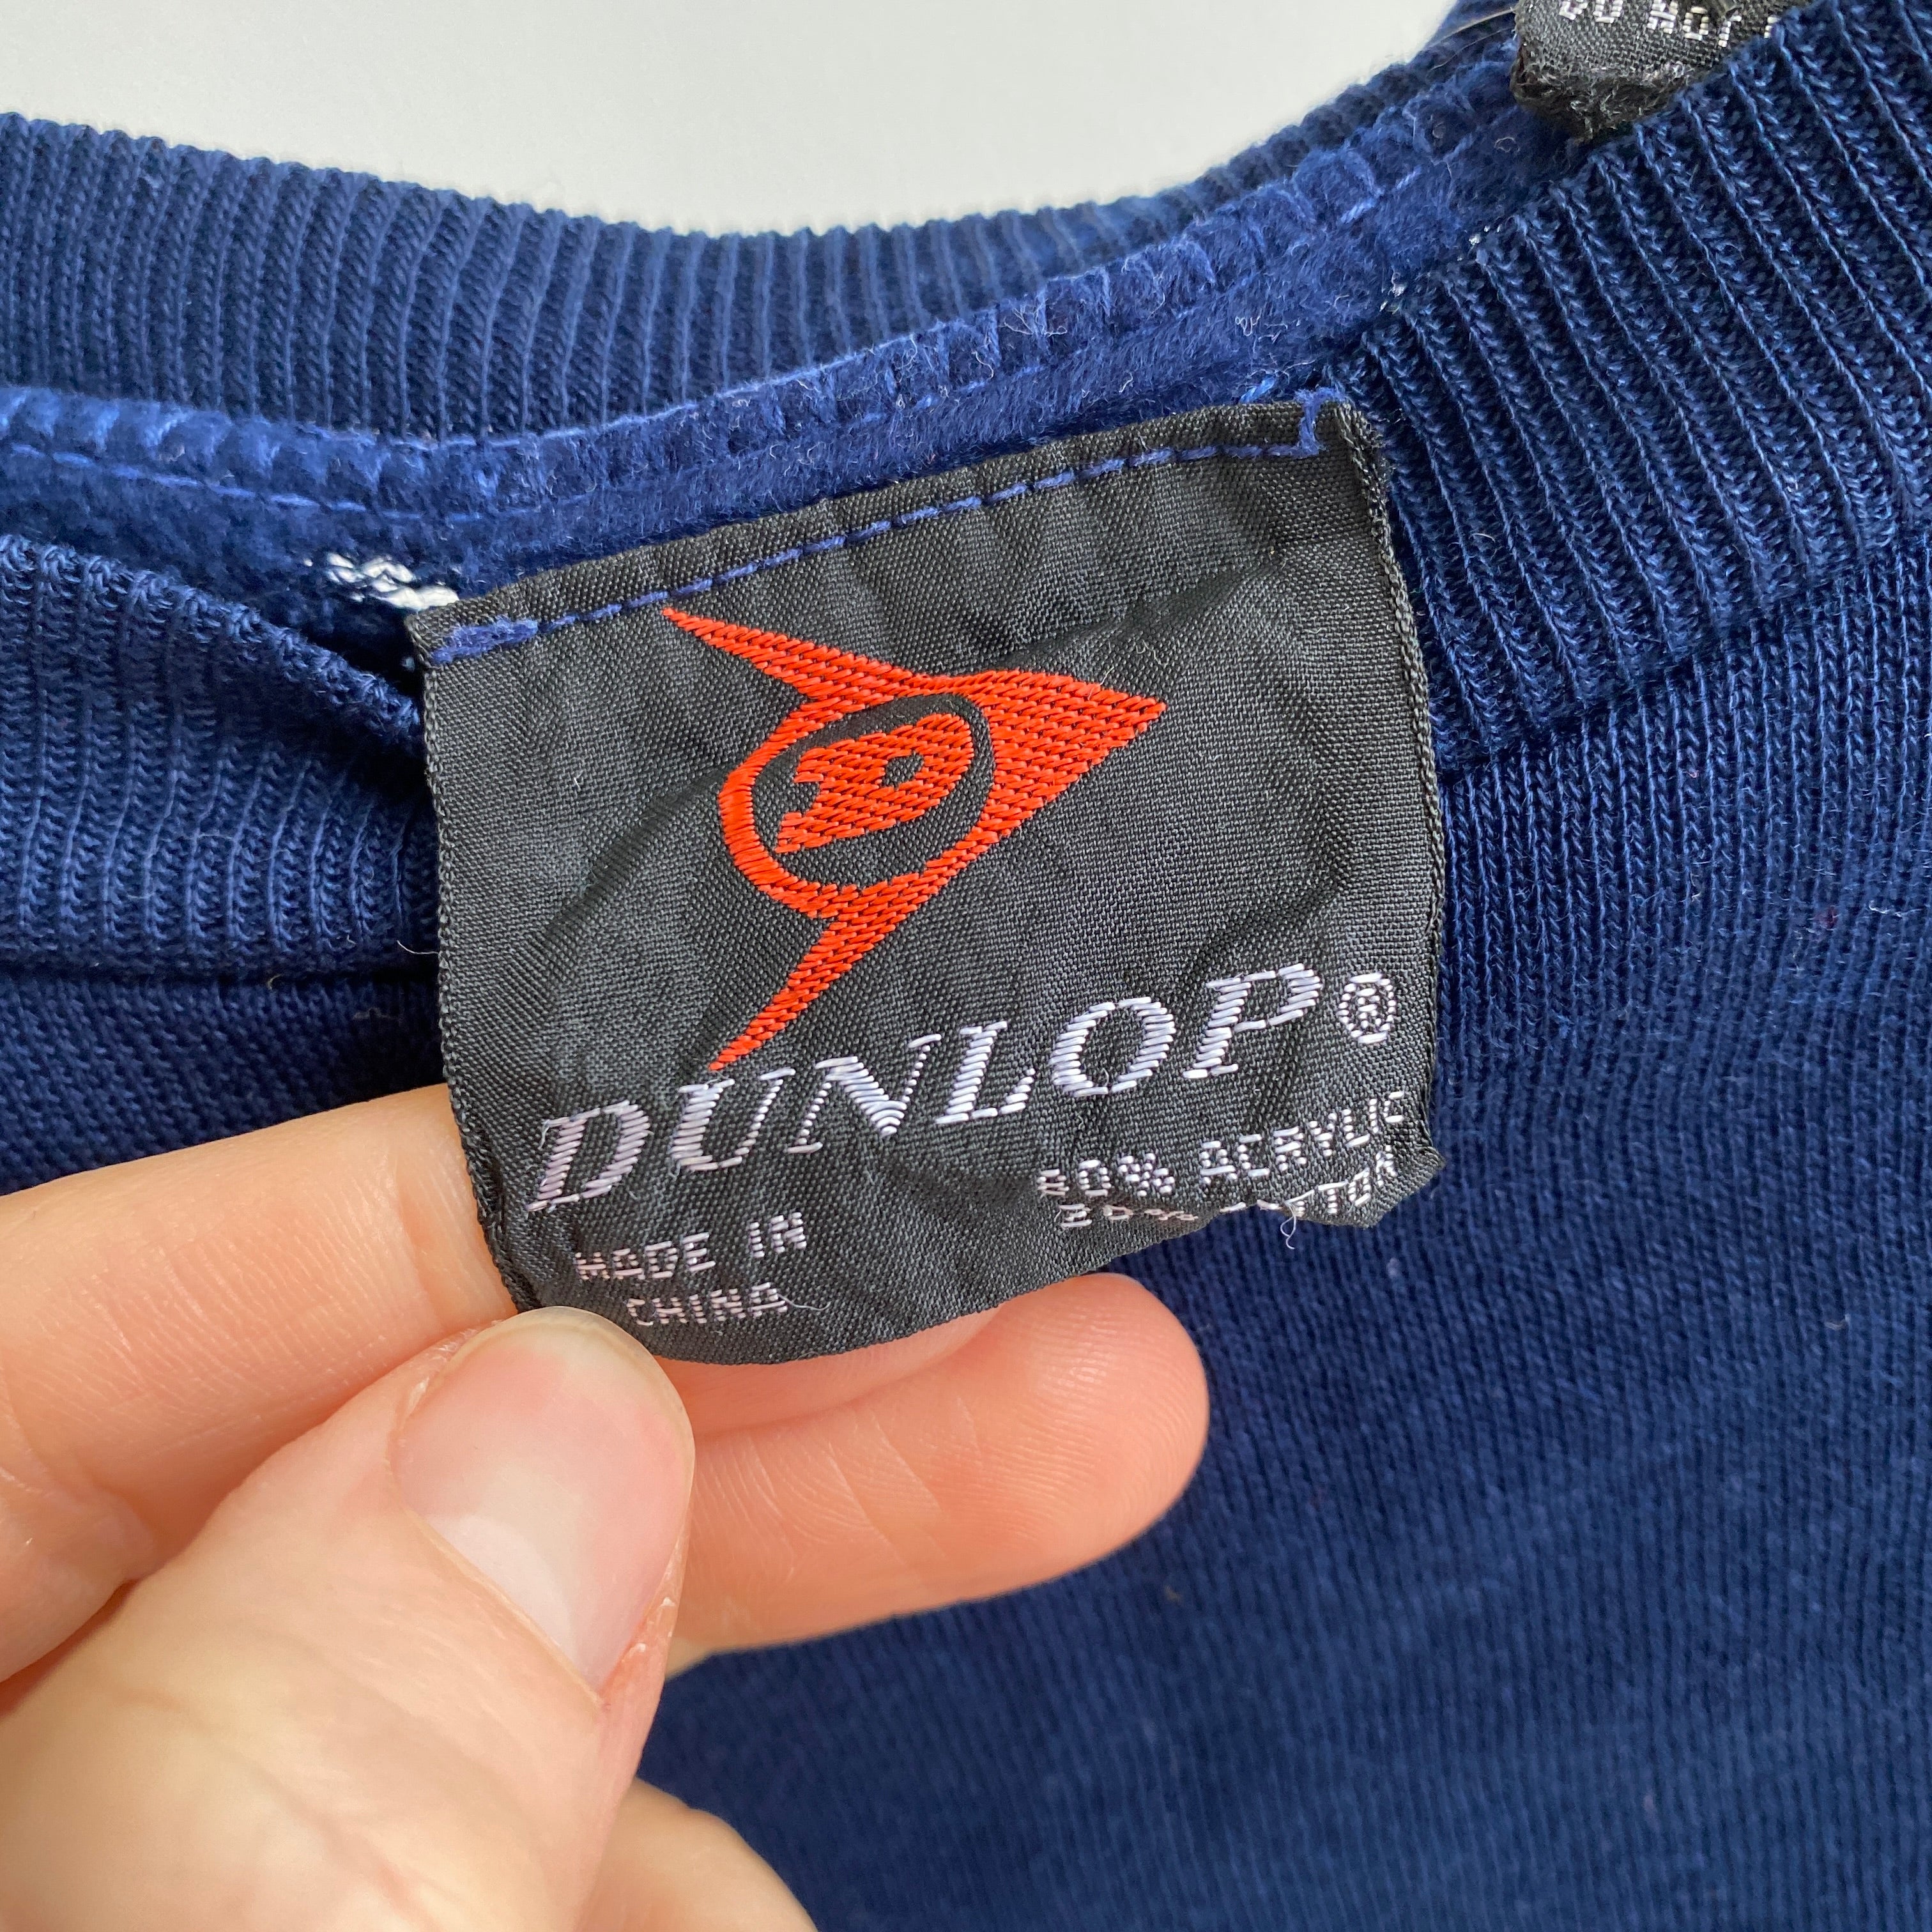 1980/90s Dunlop Color Block Soft Sweatshirt - Made in China